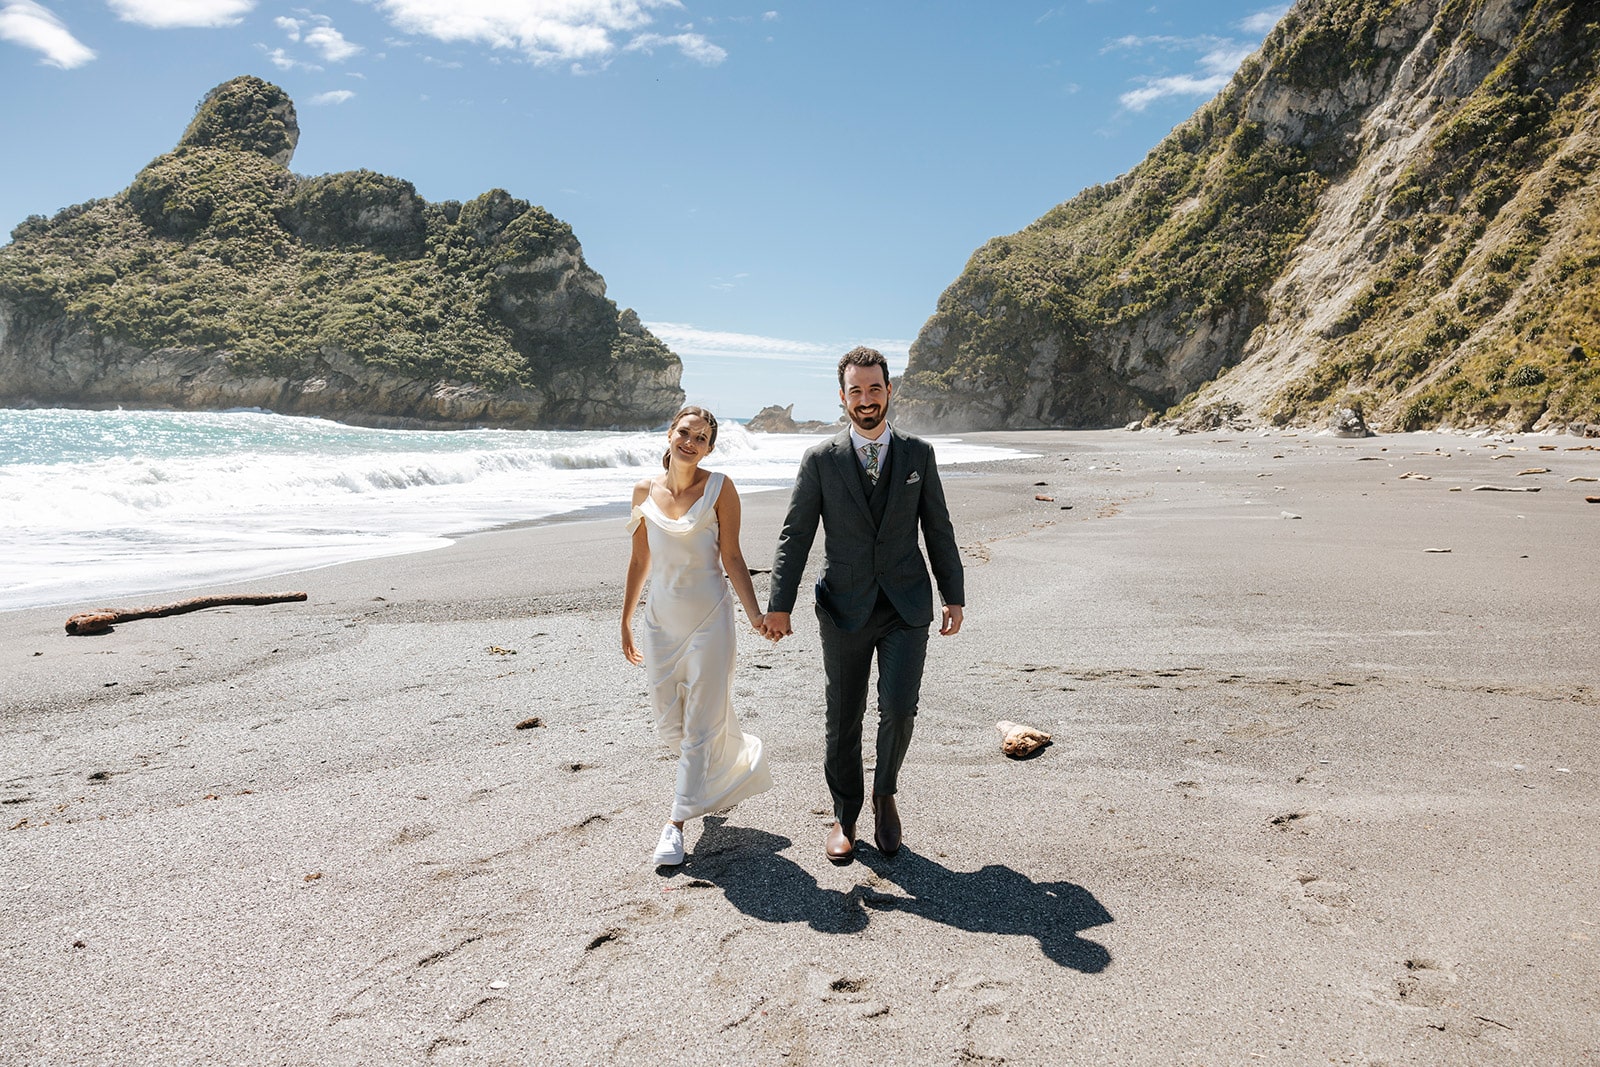 Beach Wedding in New Zealand with helicopter